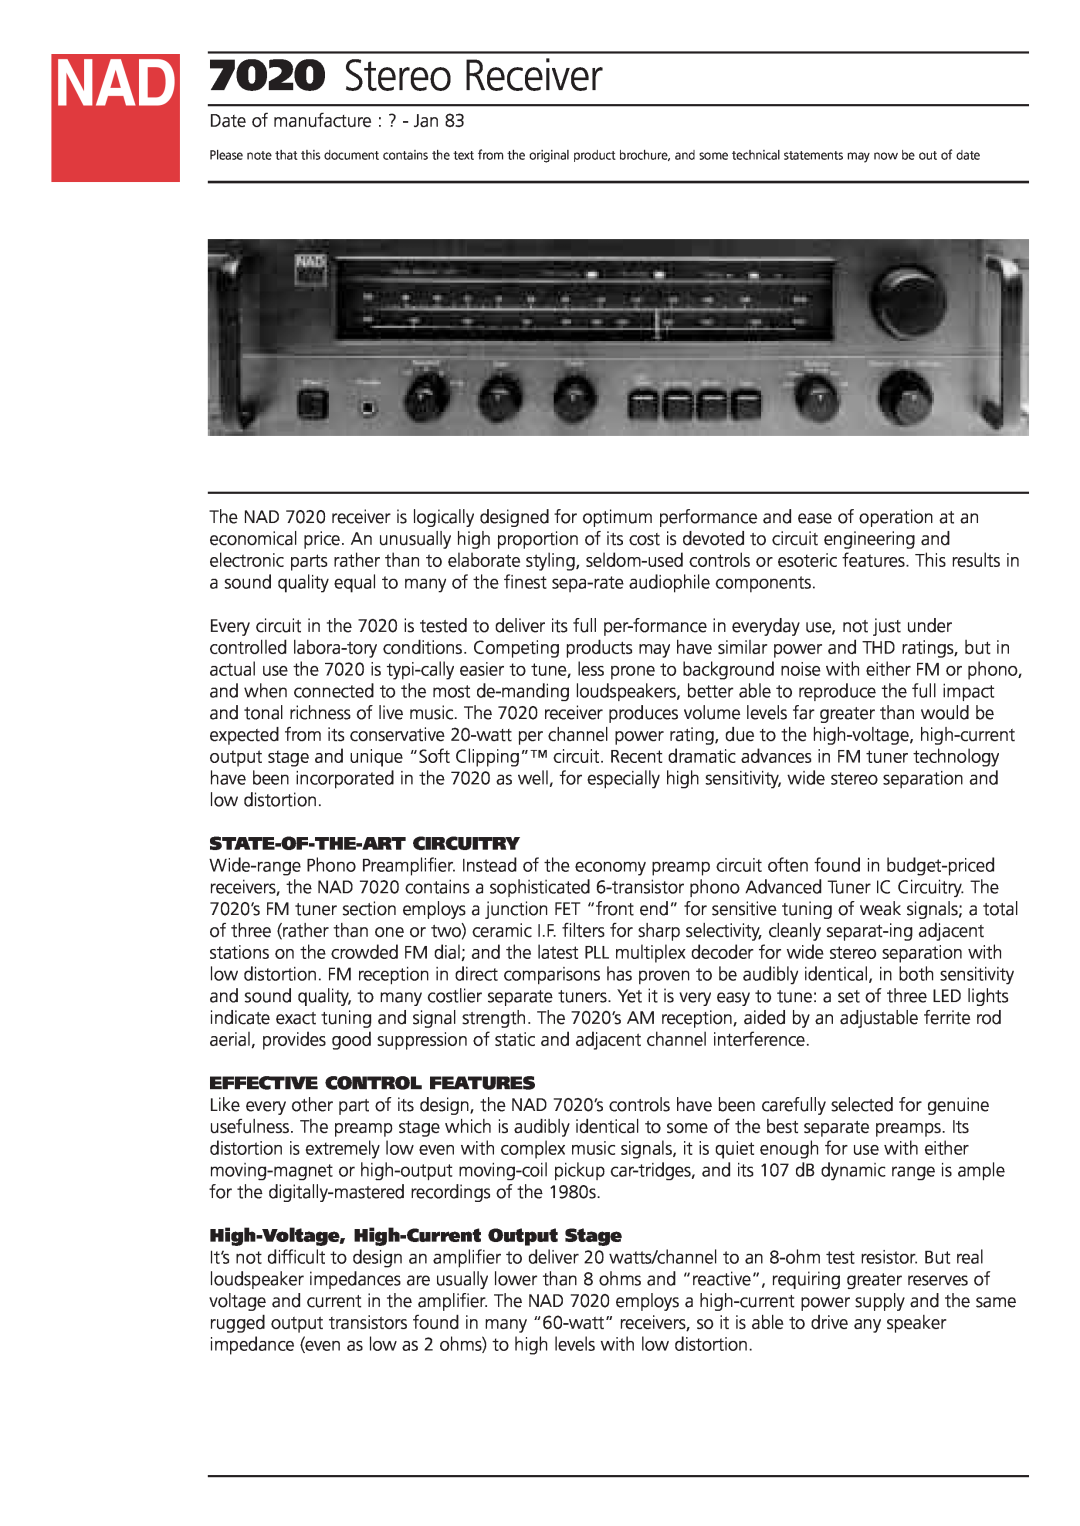 NAD 7020 brochure State-Of-The-Artcircuitry, Effective Control Features, High-Voltage, High-CurrentOutput Stage 